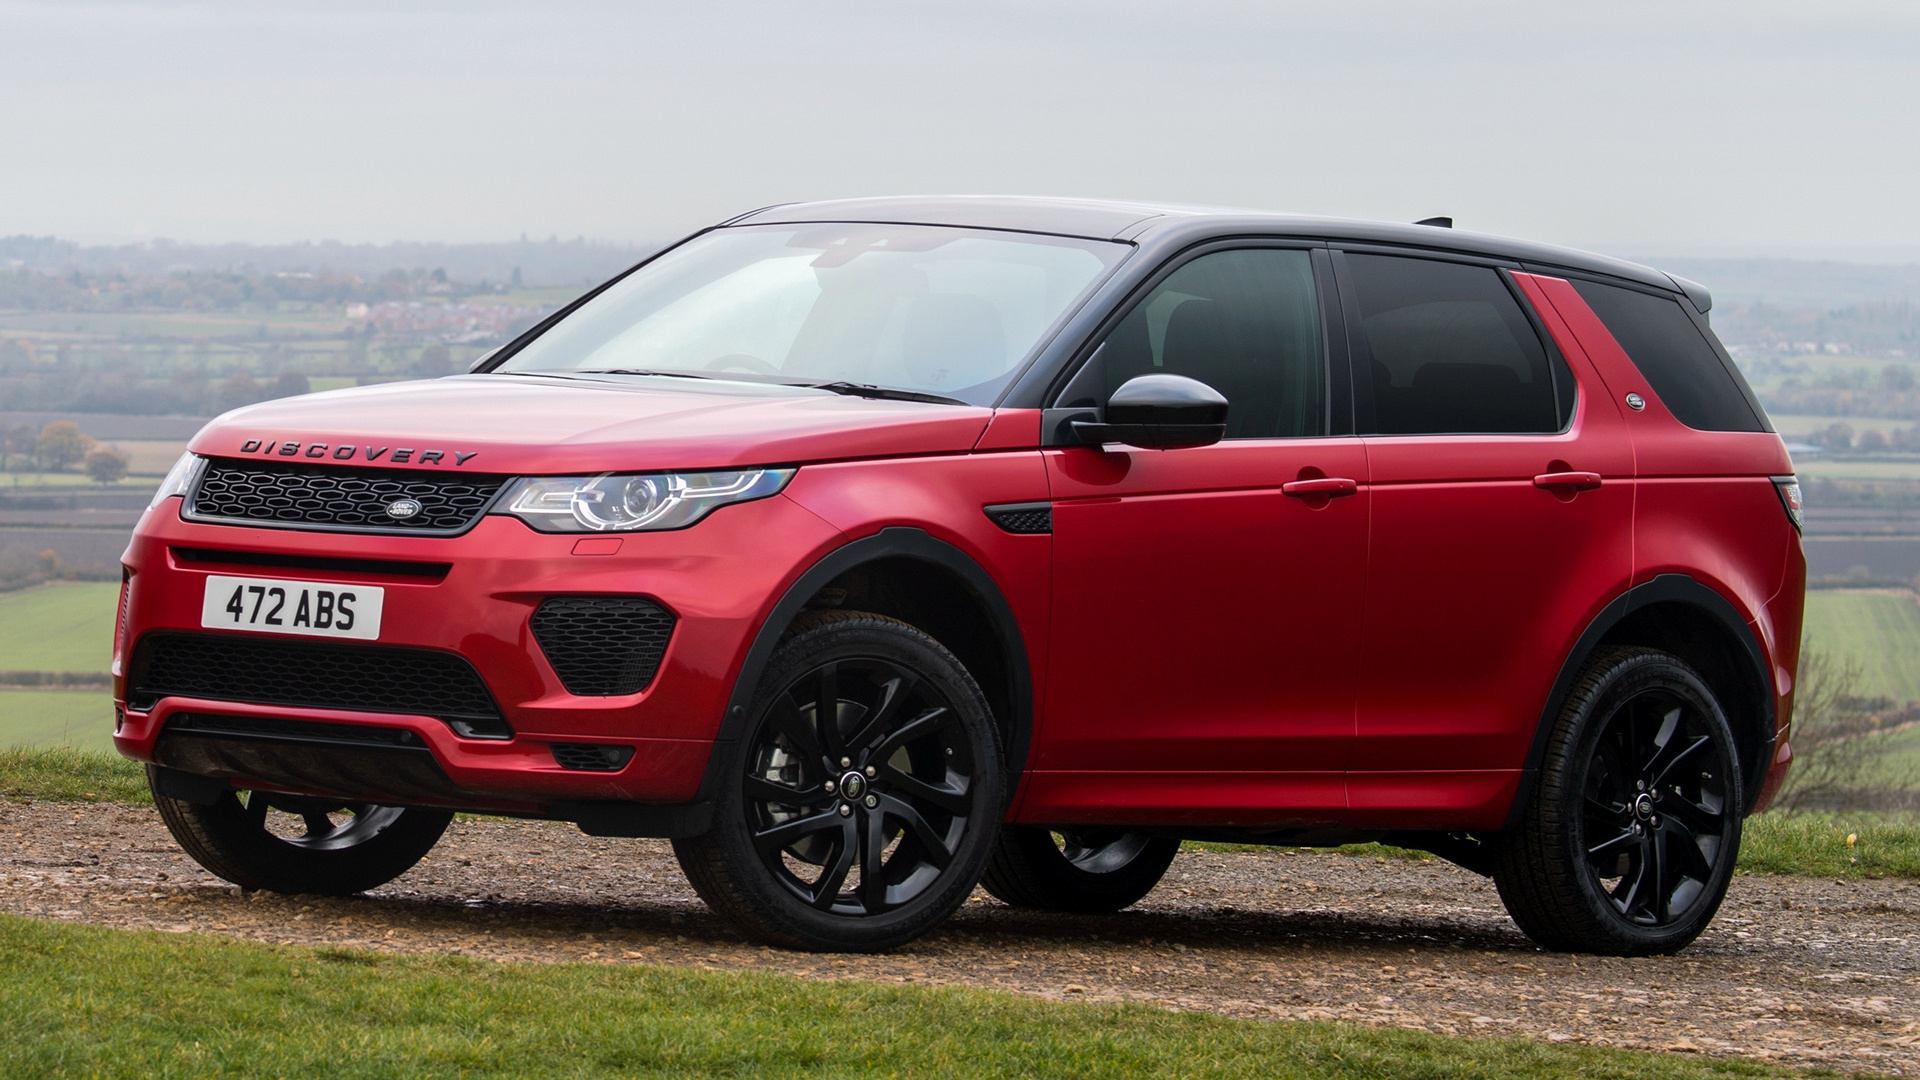 Land Rover Discovery Sport Dynamic Luxury Car Subcompact Car Crossover Car Suv Red Car Car 1920x1080